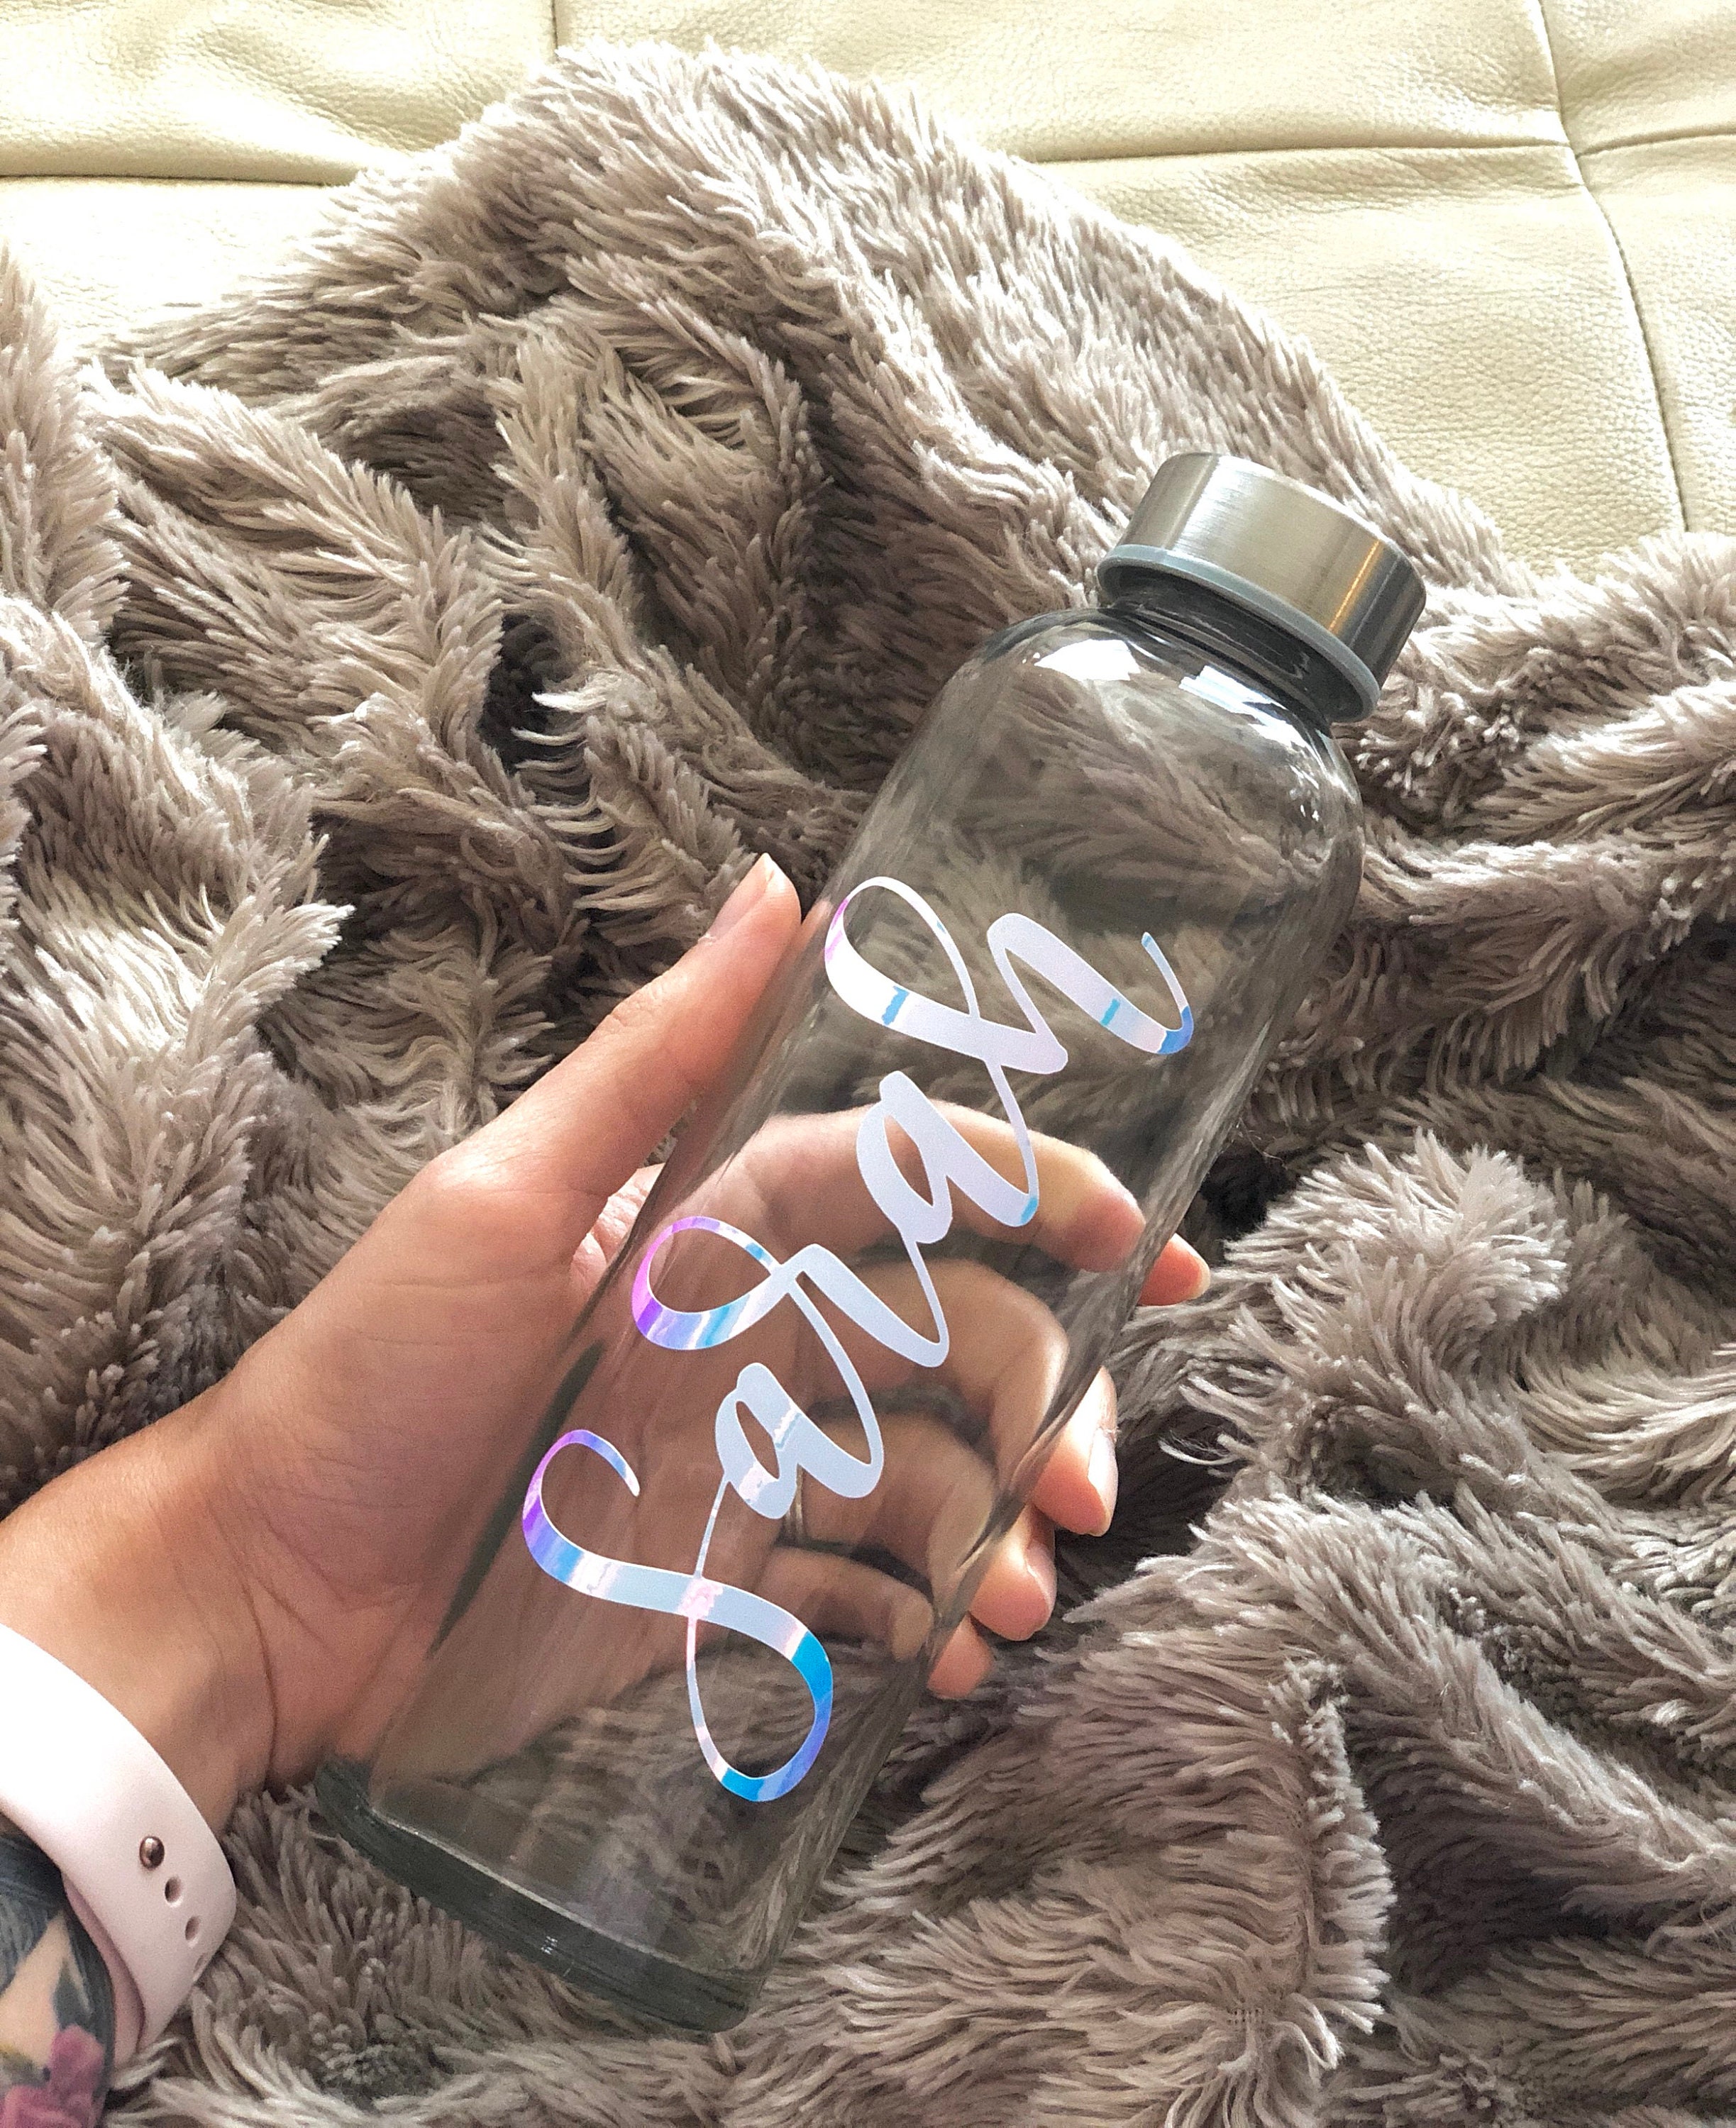 18 Oz. Personalized Hand Lettered Glass Water Bottle Stainless